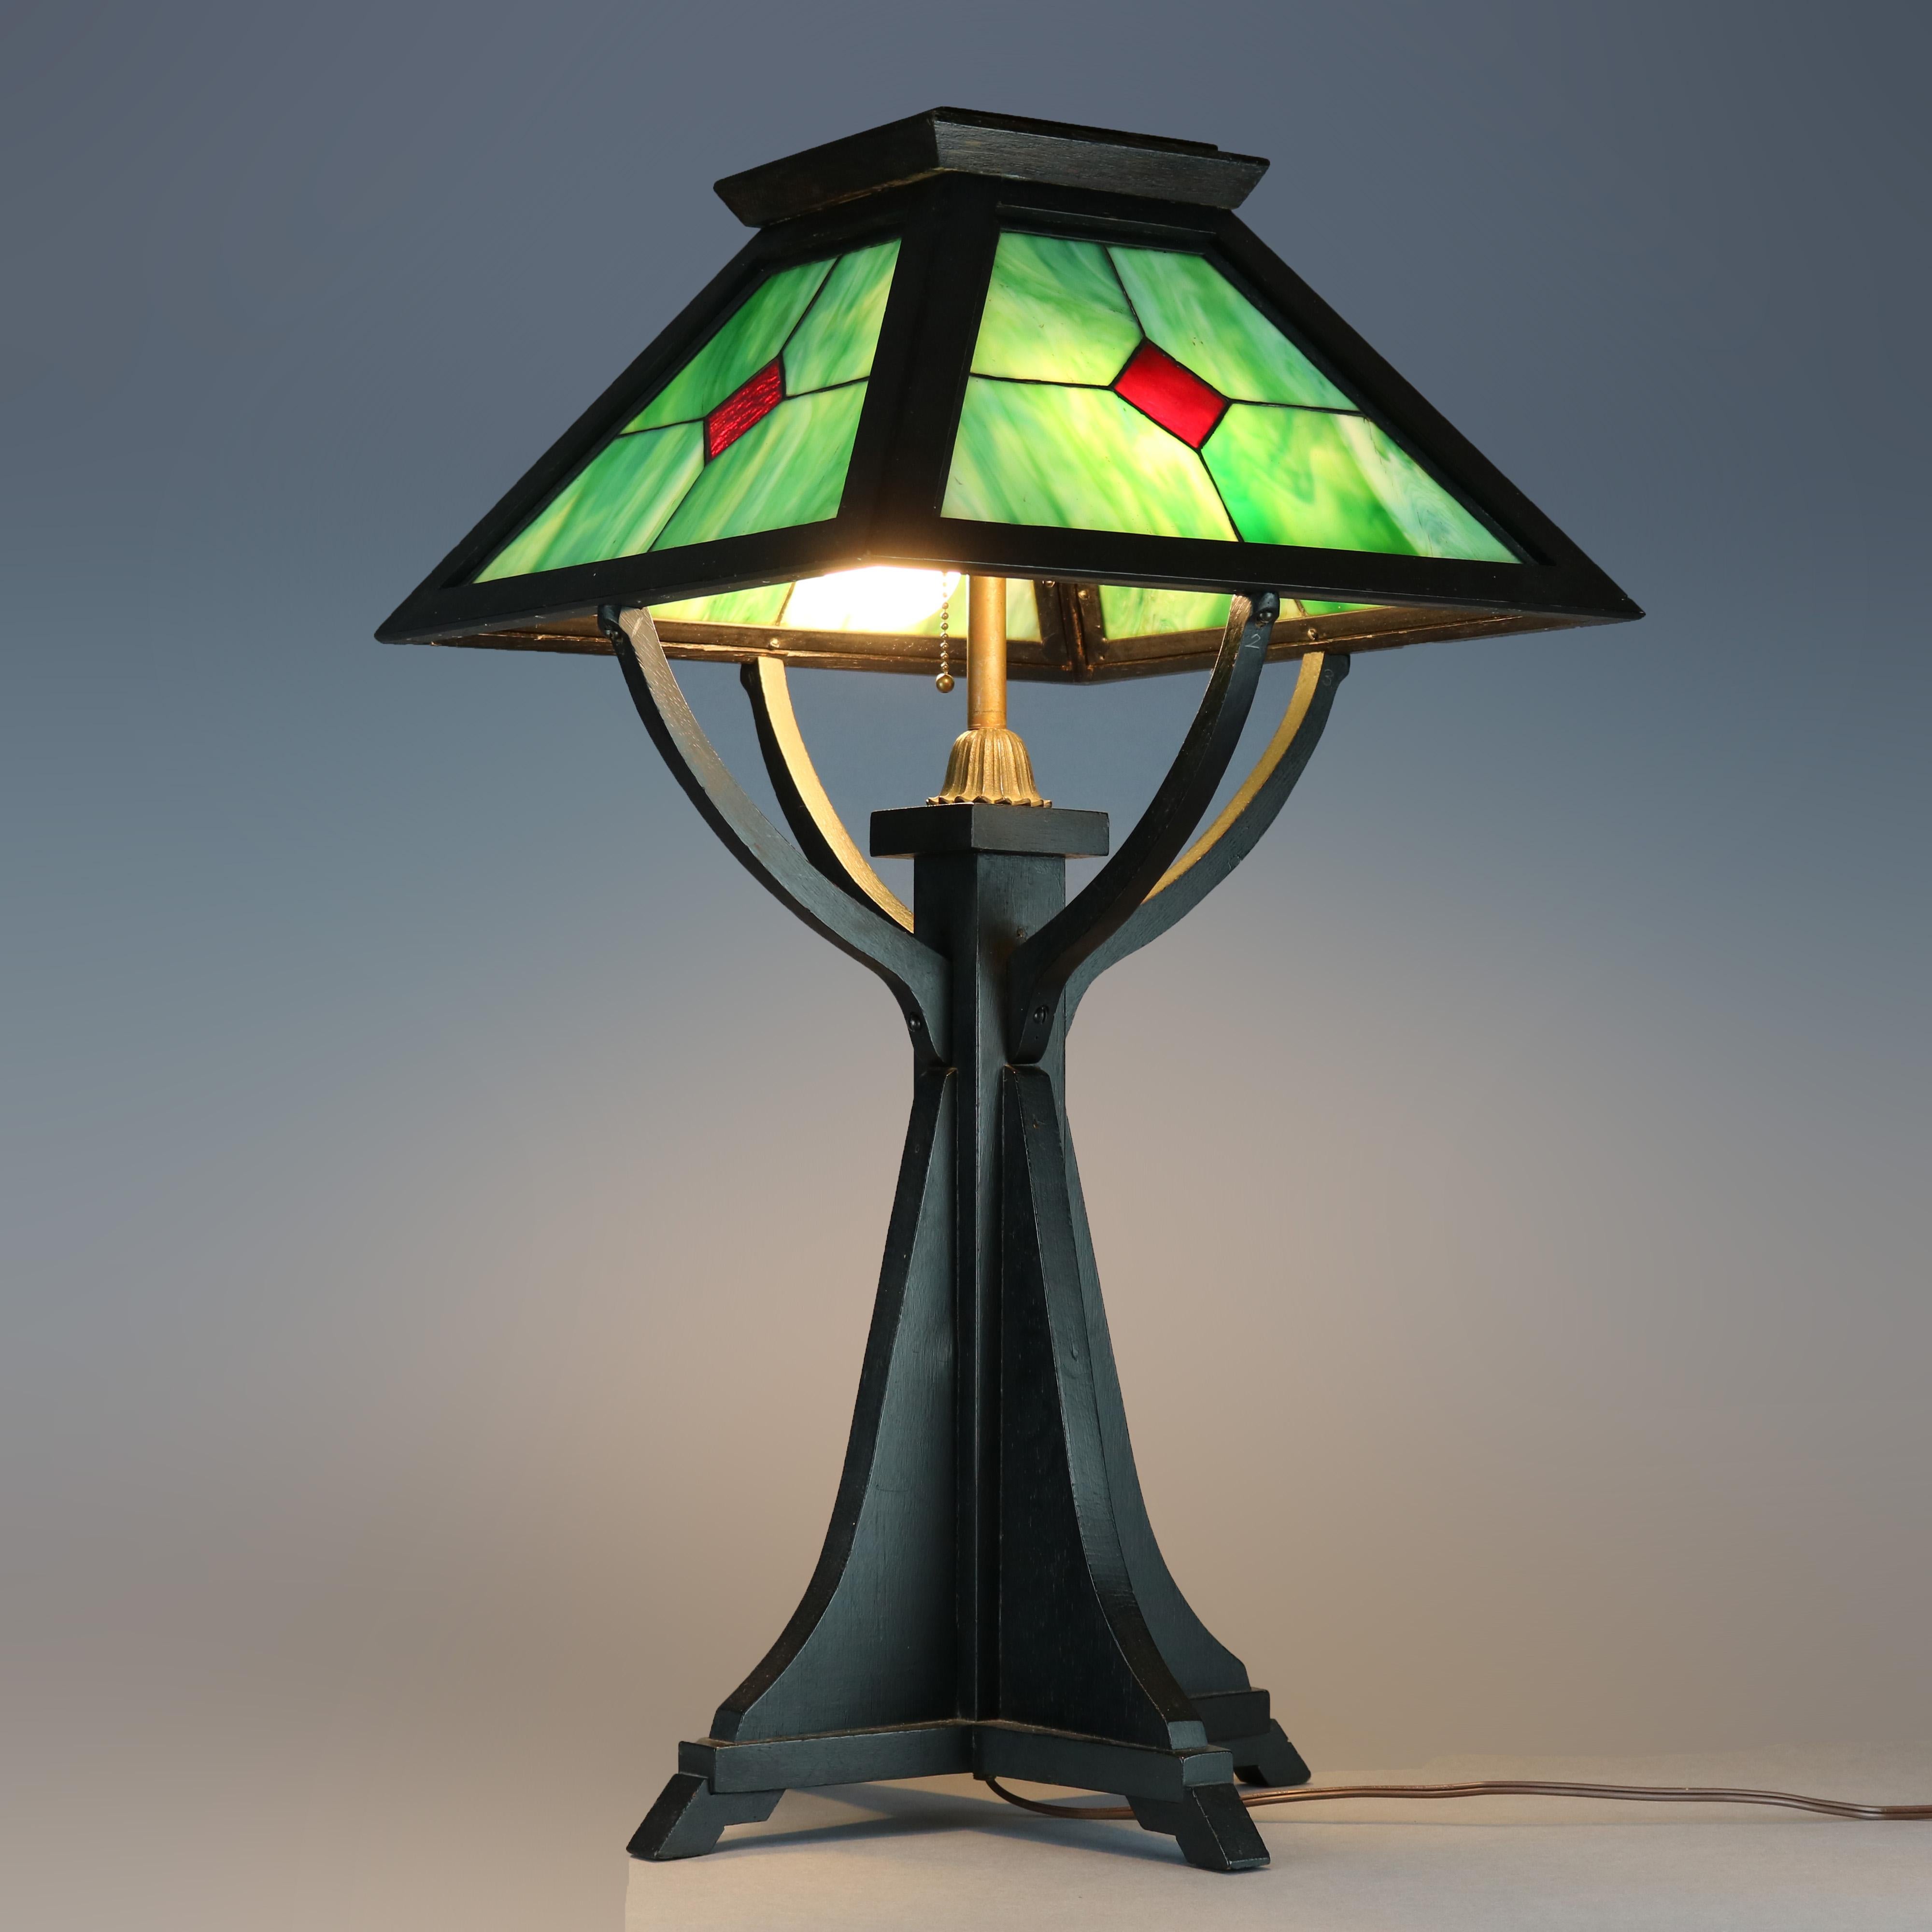 An antique and large Arts & Crafts Prairie School table lamp offers leaded slag glass shade with pyramidal oak cap surmounting flared base with double sockets, circa 1910.

Measures: 27.25